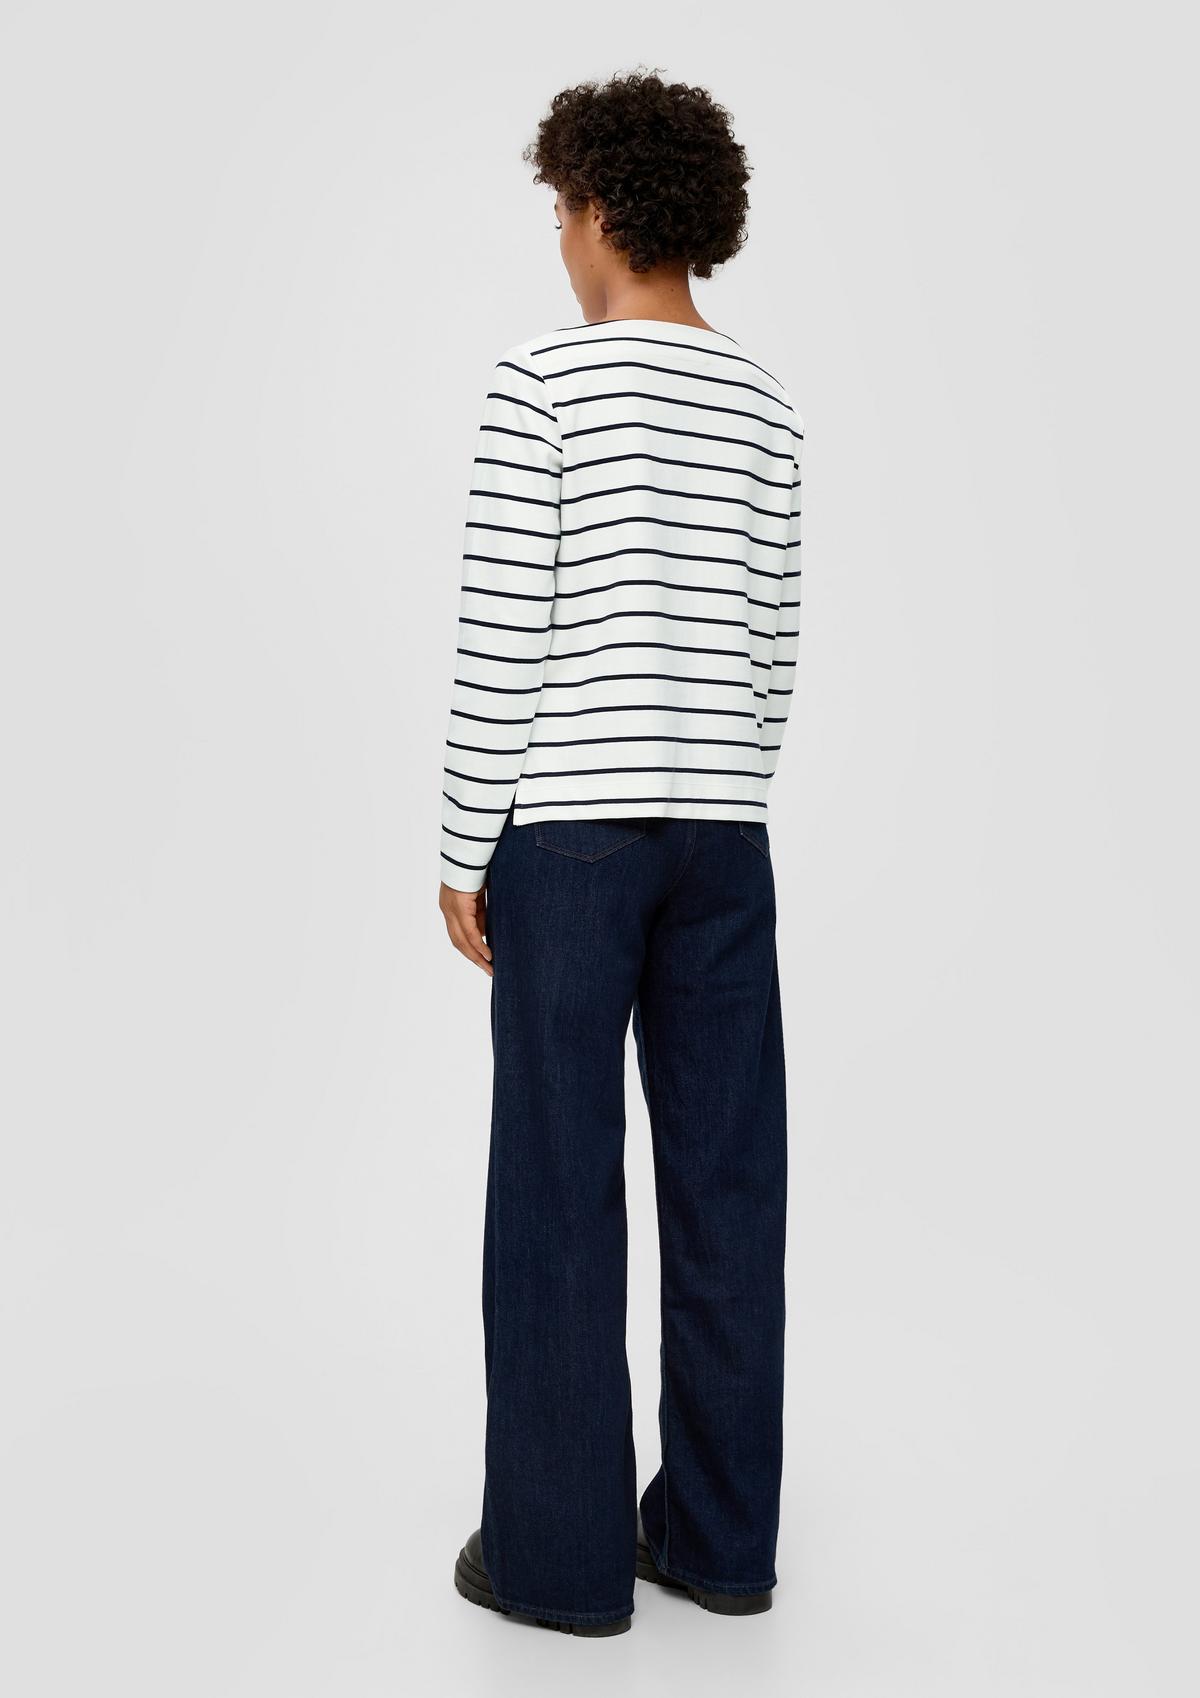 stretch top made of navy - sleeve cotton Long